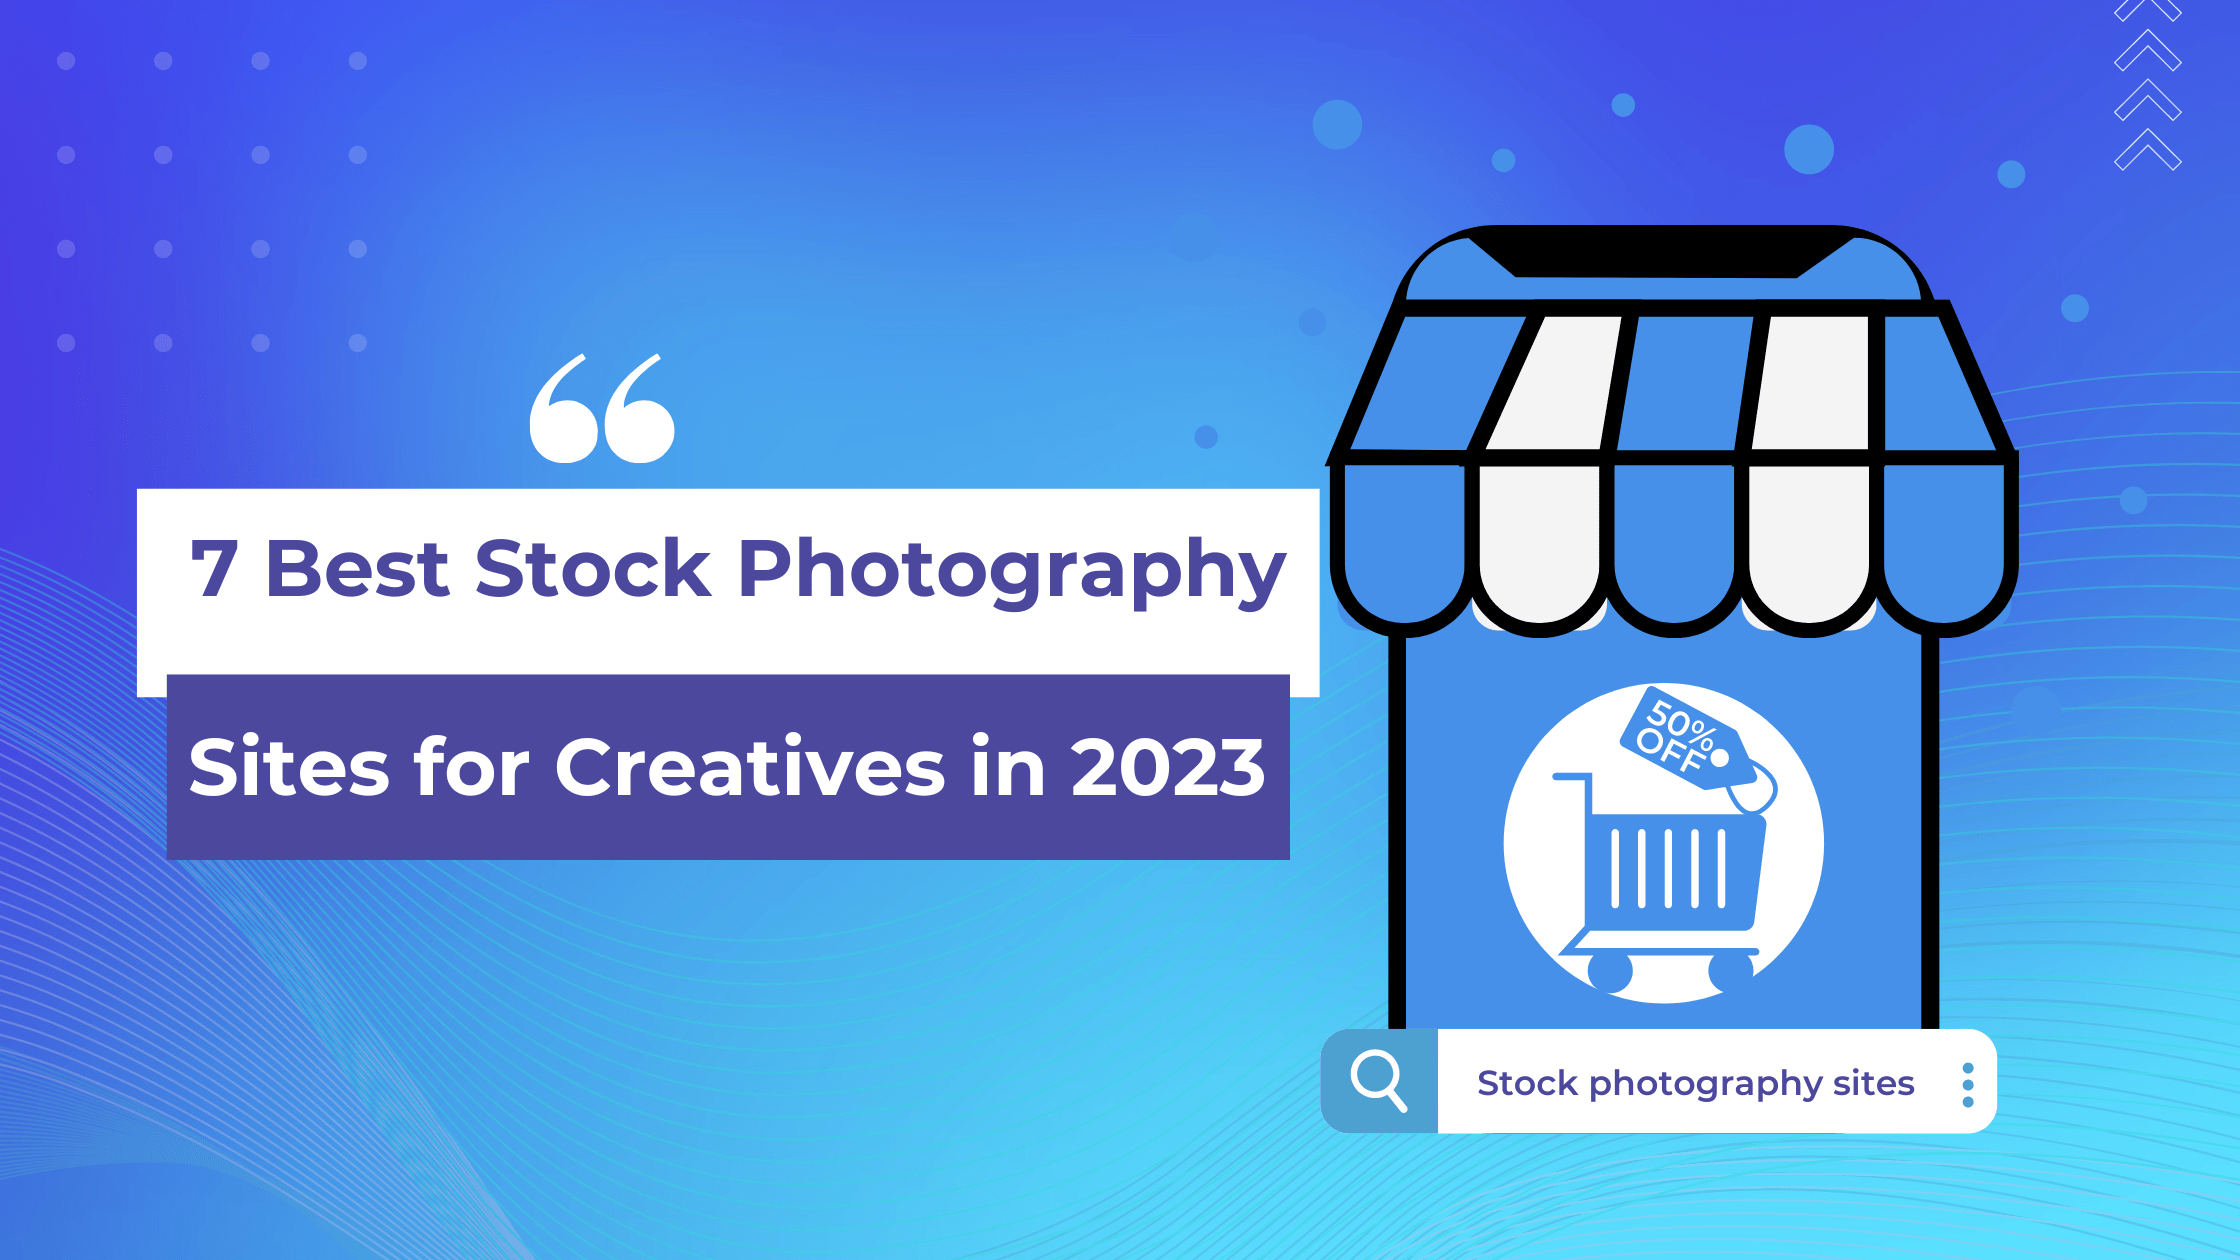 7 Best stock photography sites for creatives in 2023